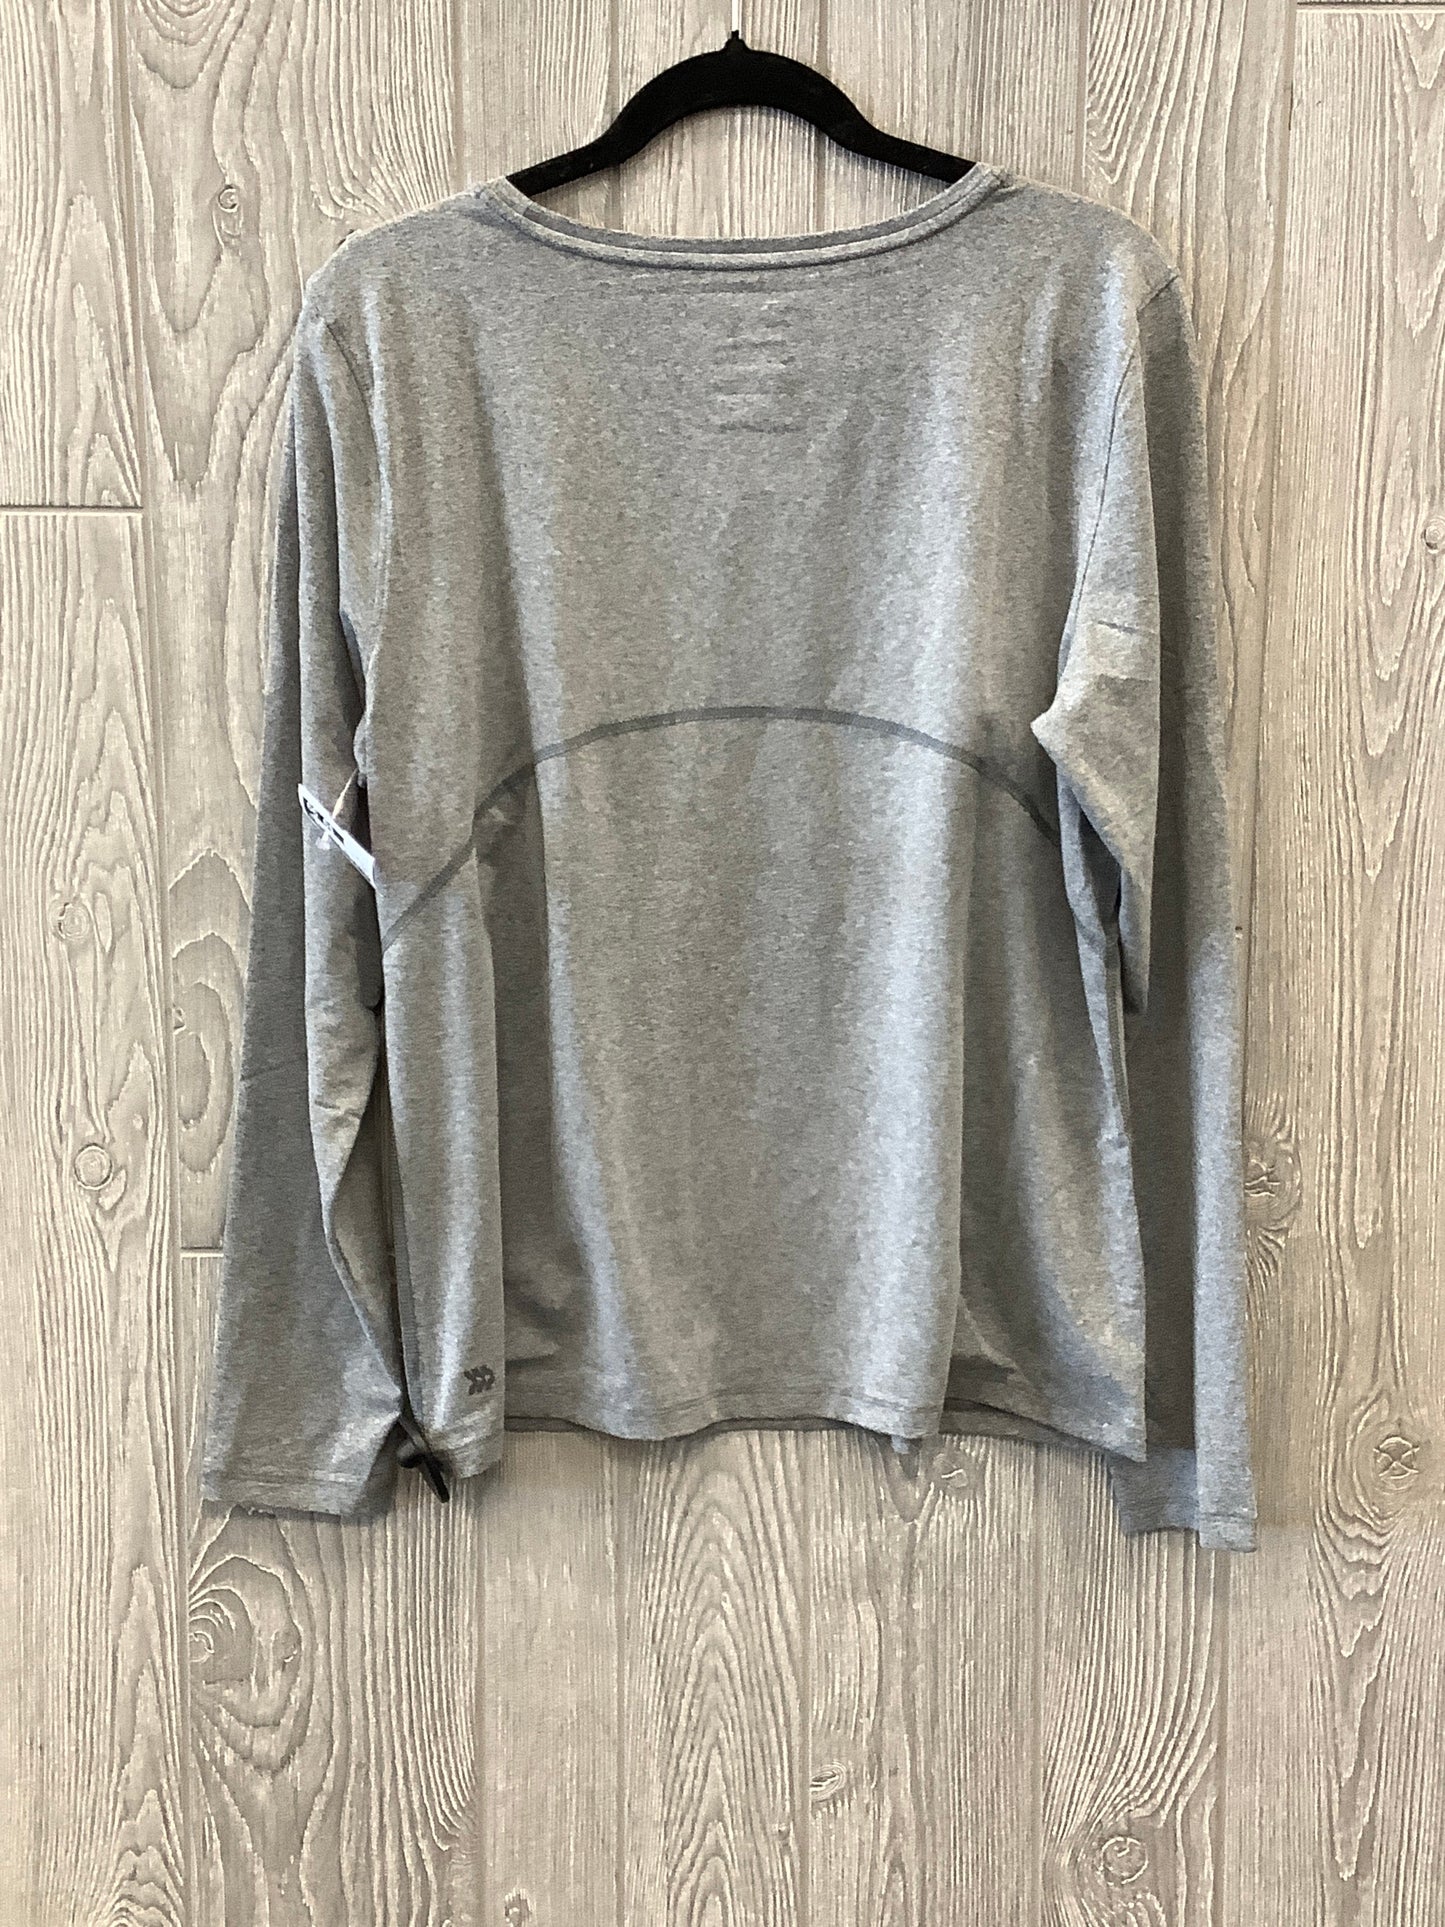 Grey Athletic Top Long Sleeve Crewneck All In Motion, Size Xl